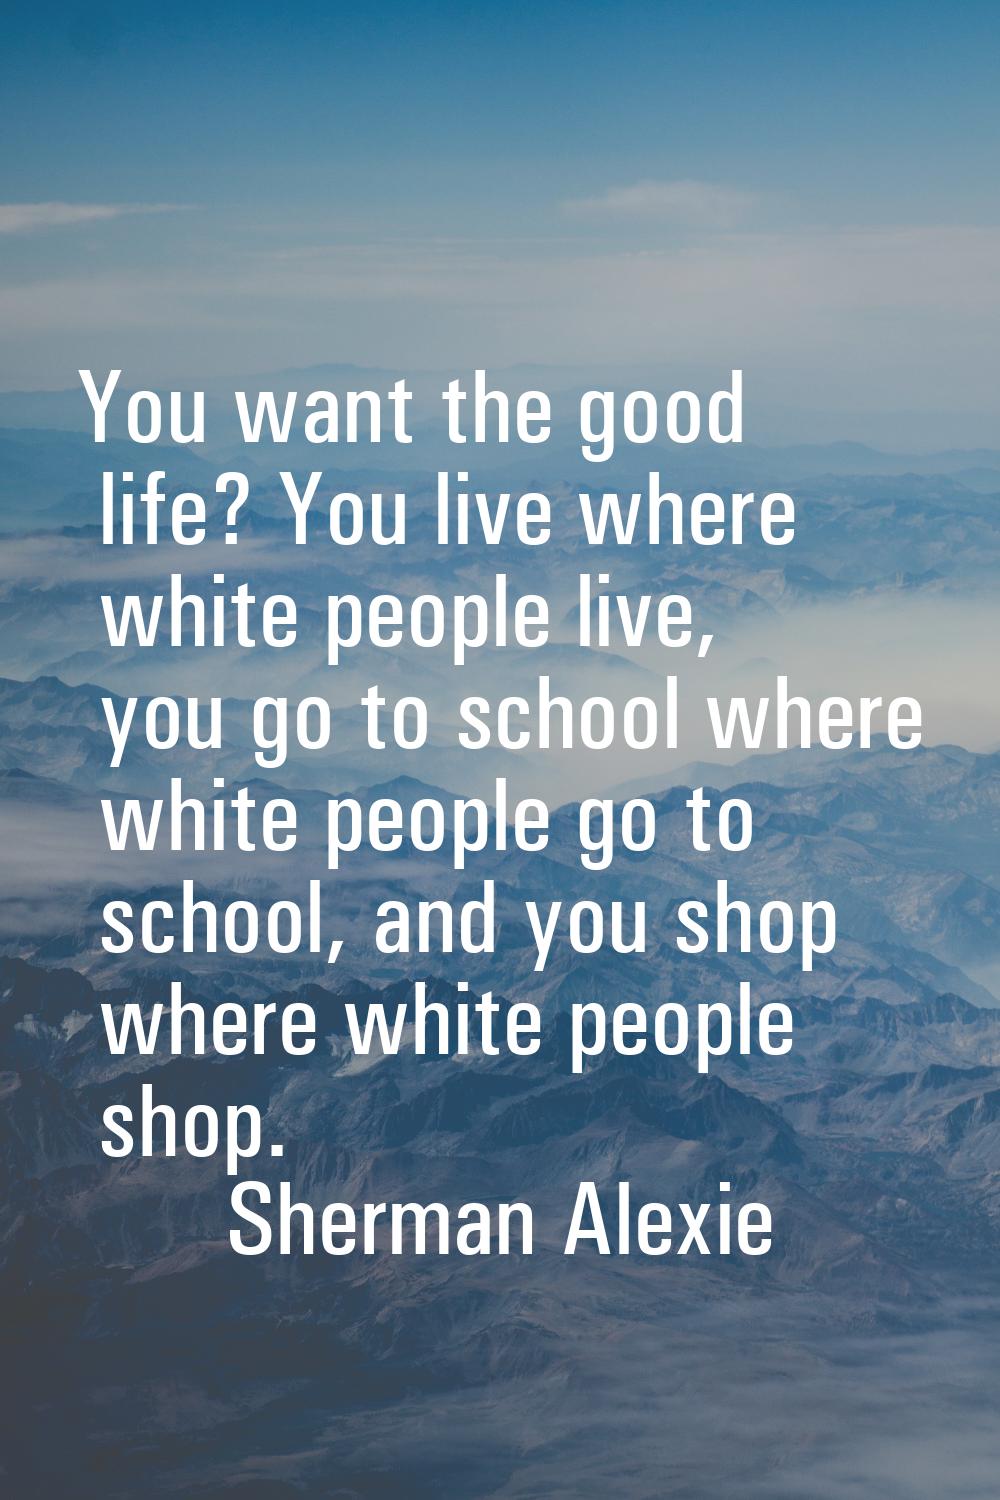 You want the good life? You live where white people live, you go to school where white people go to